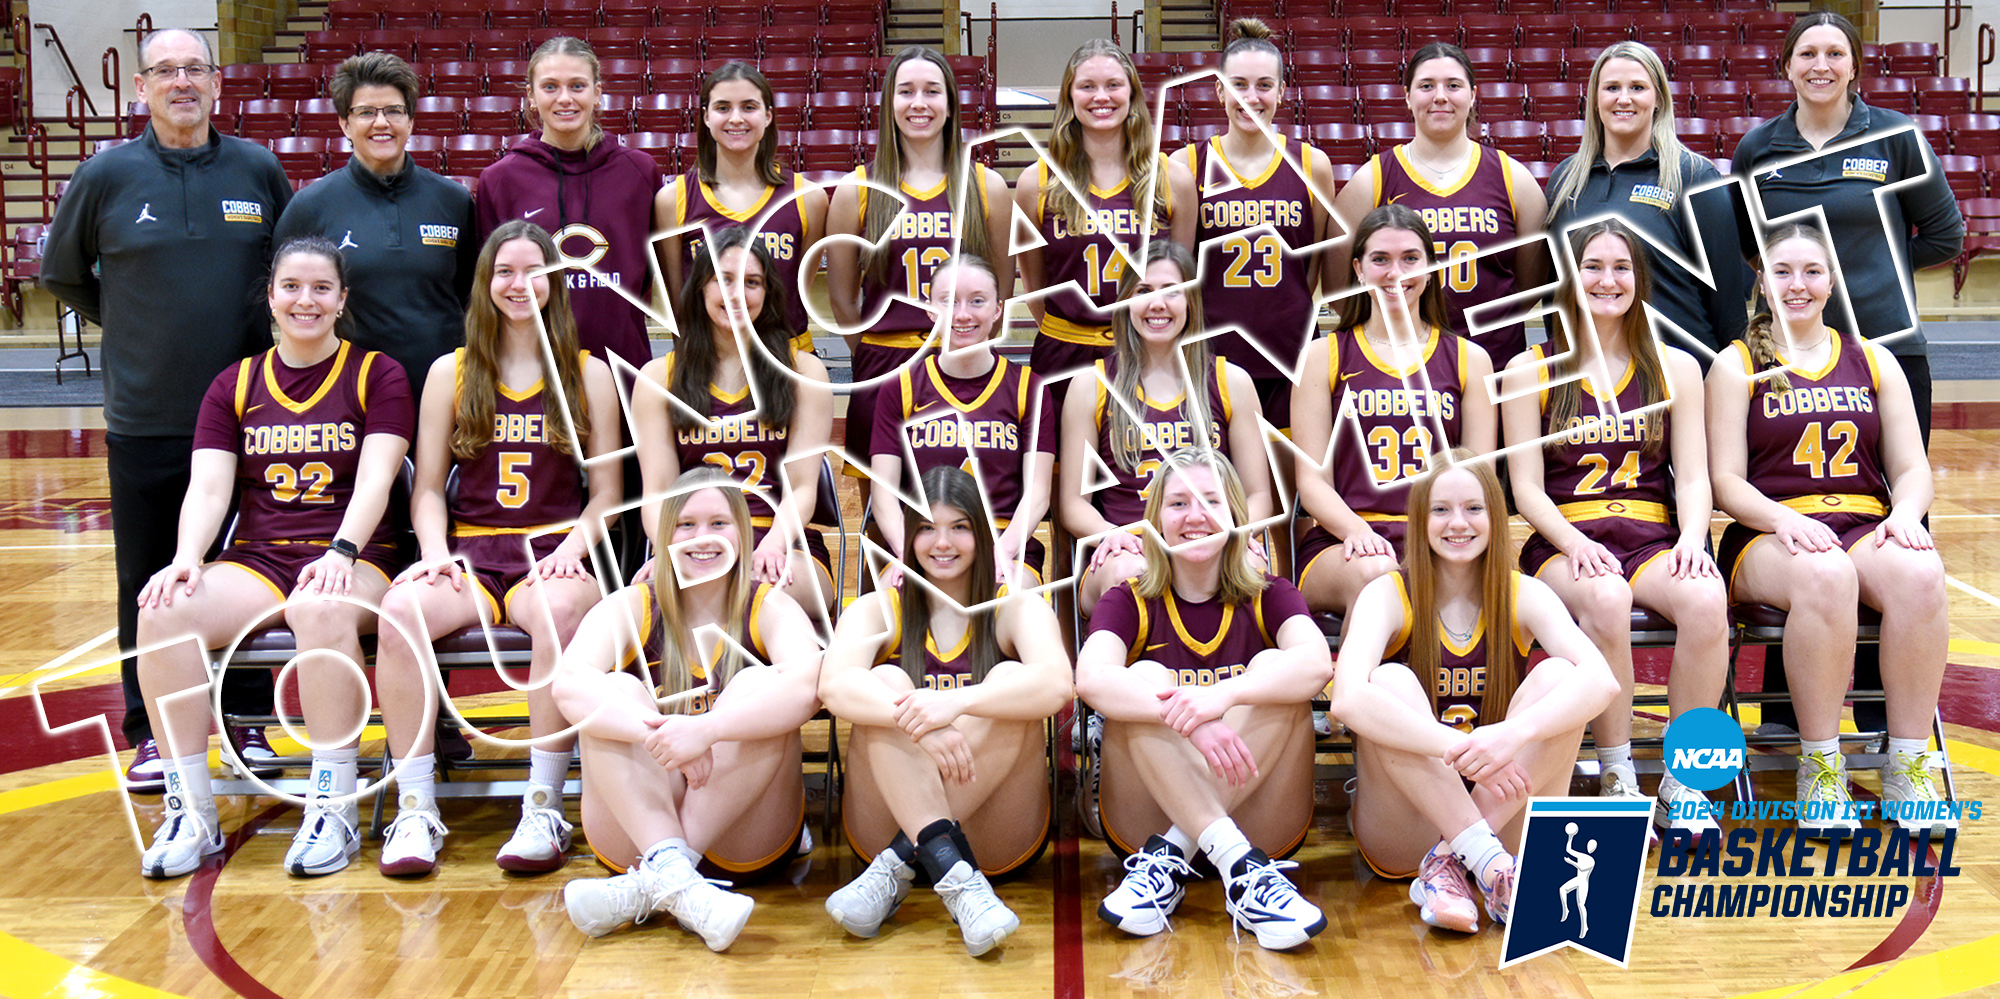 Concordia was selected as one of the 21 at-large teams to compete in the 64-team NCAA Tournament which begins on Mar.1.